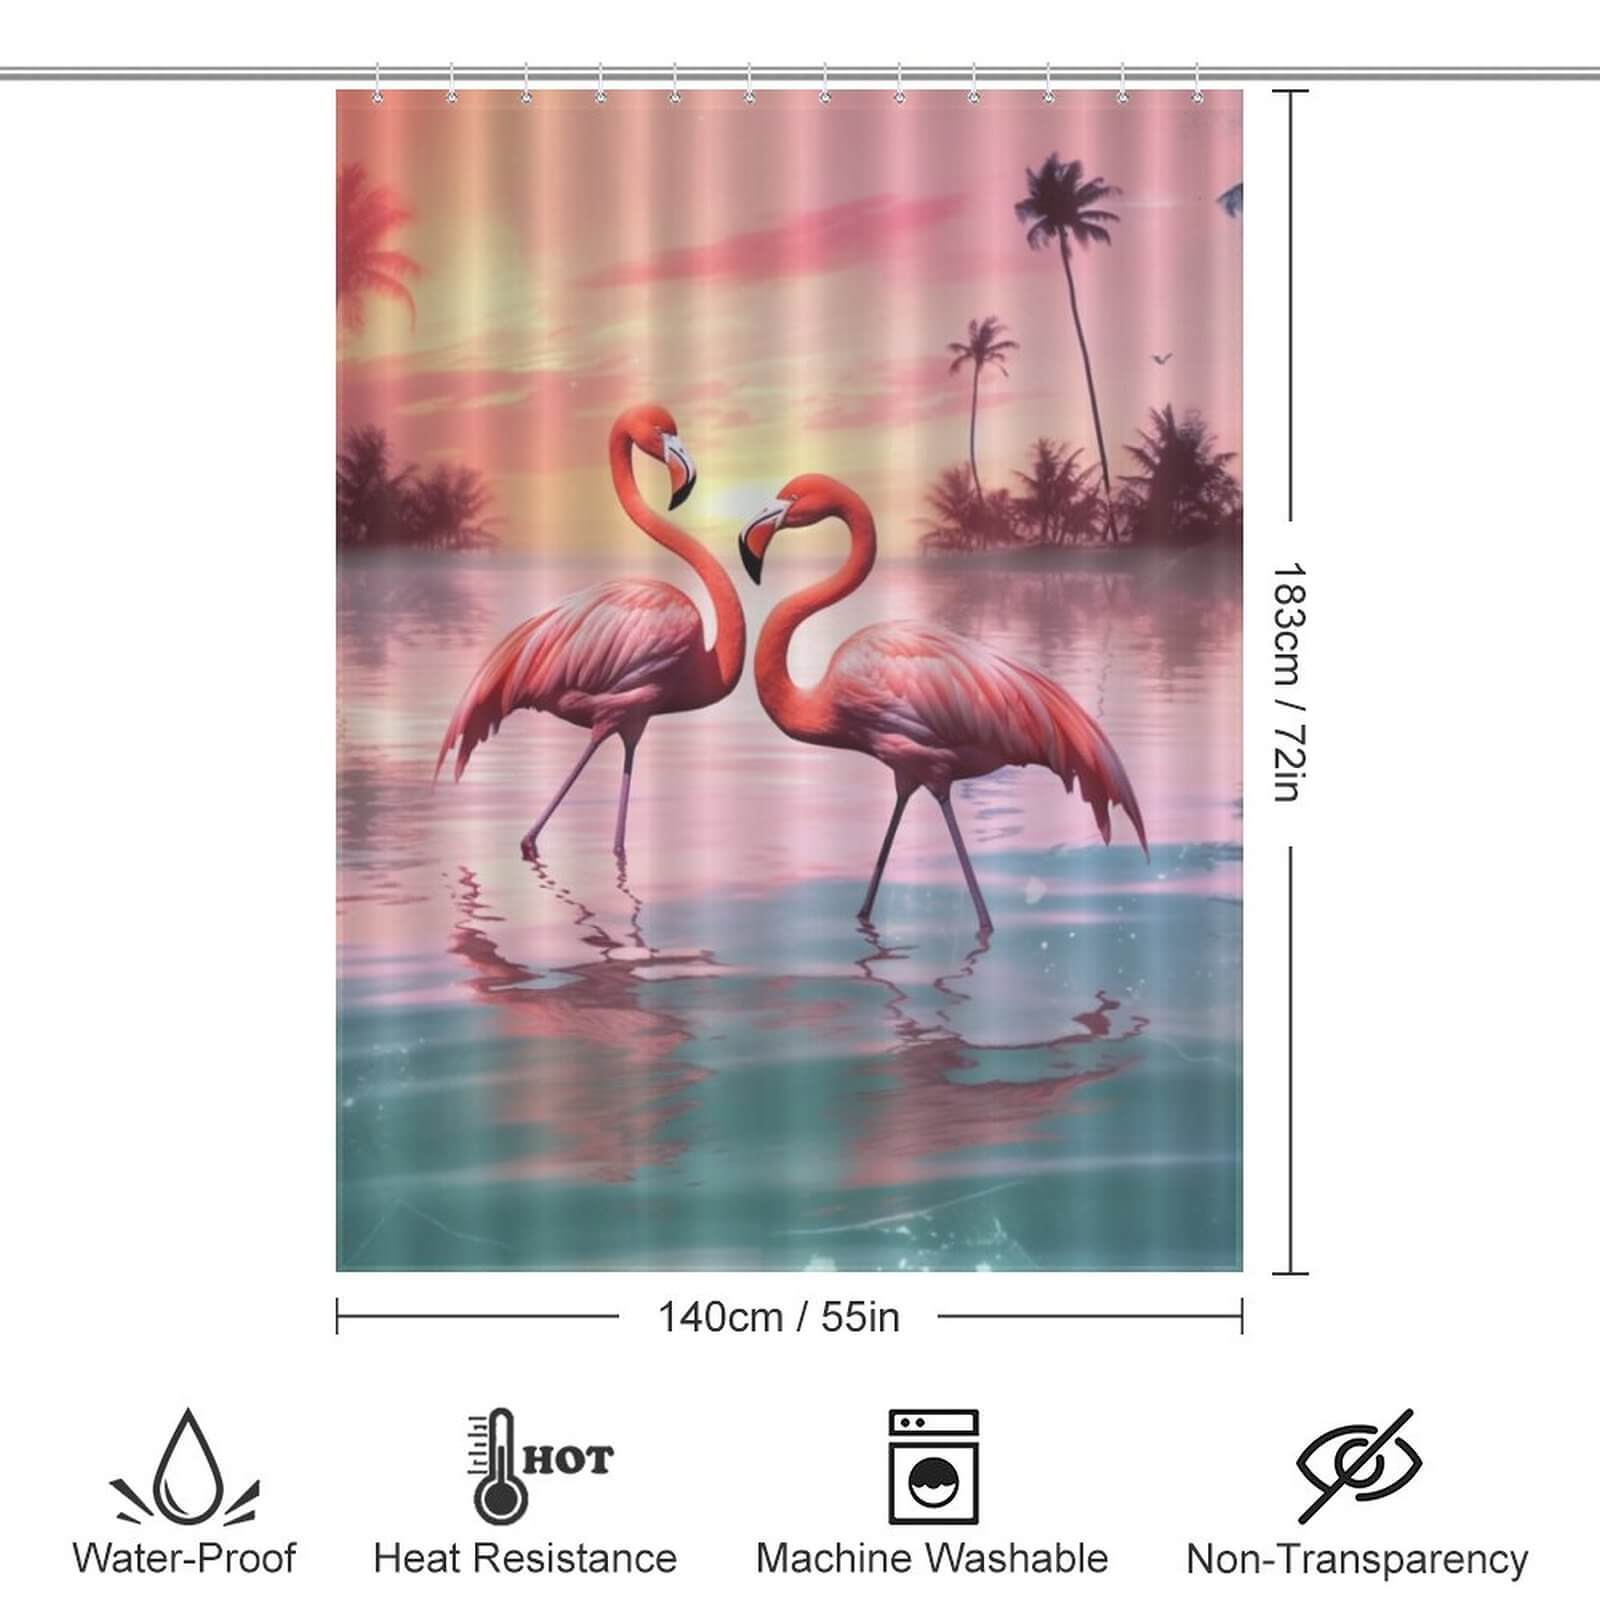 Transform your bathroom into a tropical paradise with the Ocean Beach Flamingo Shower Curtain from Cotton Cat.